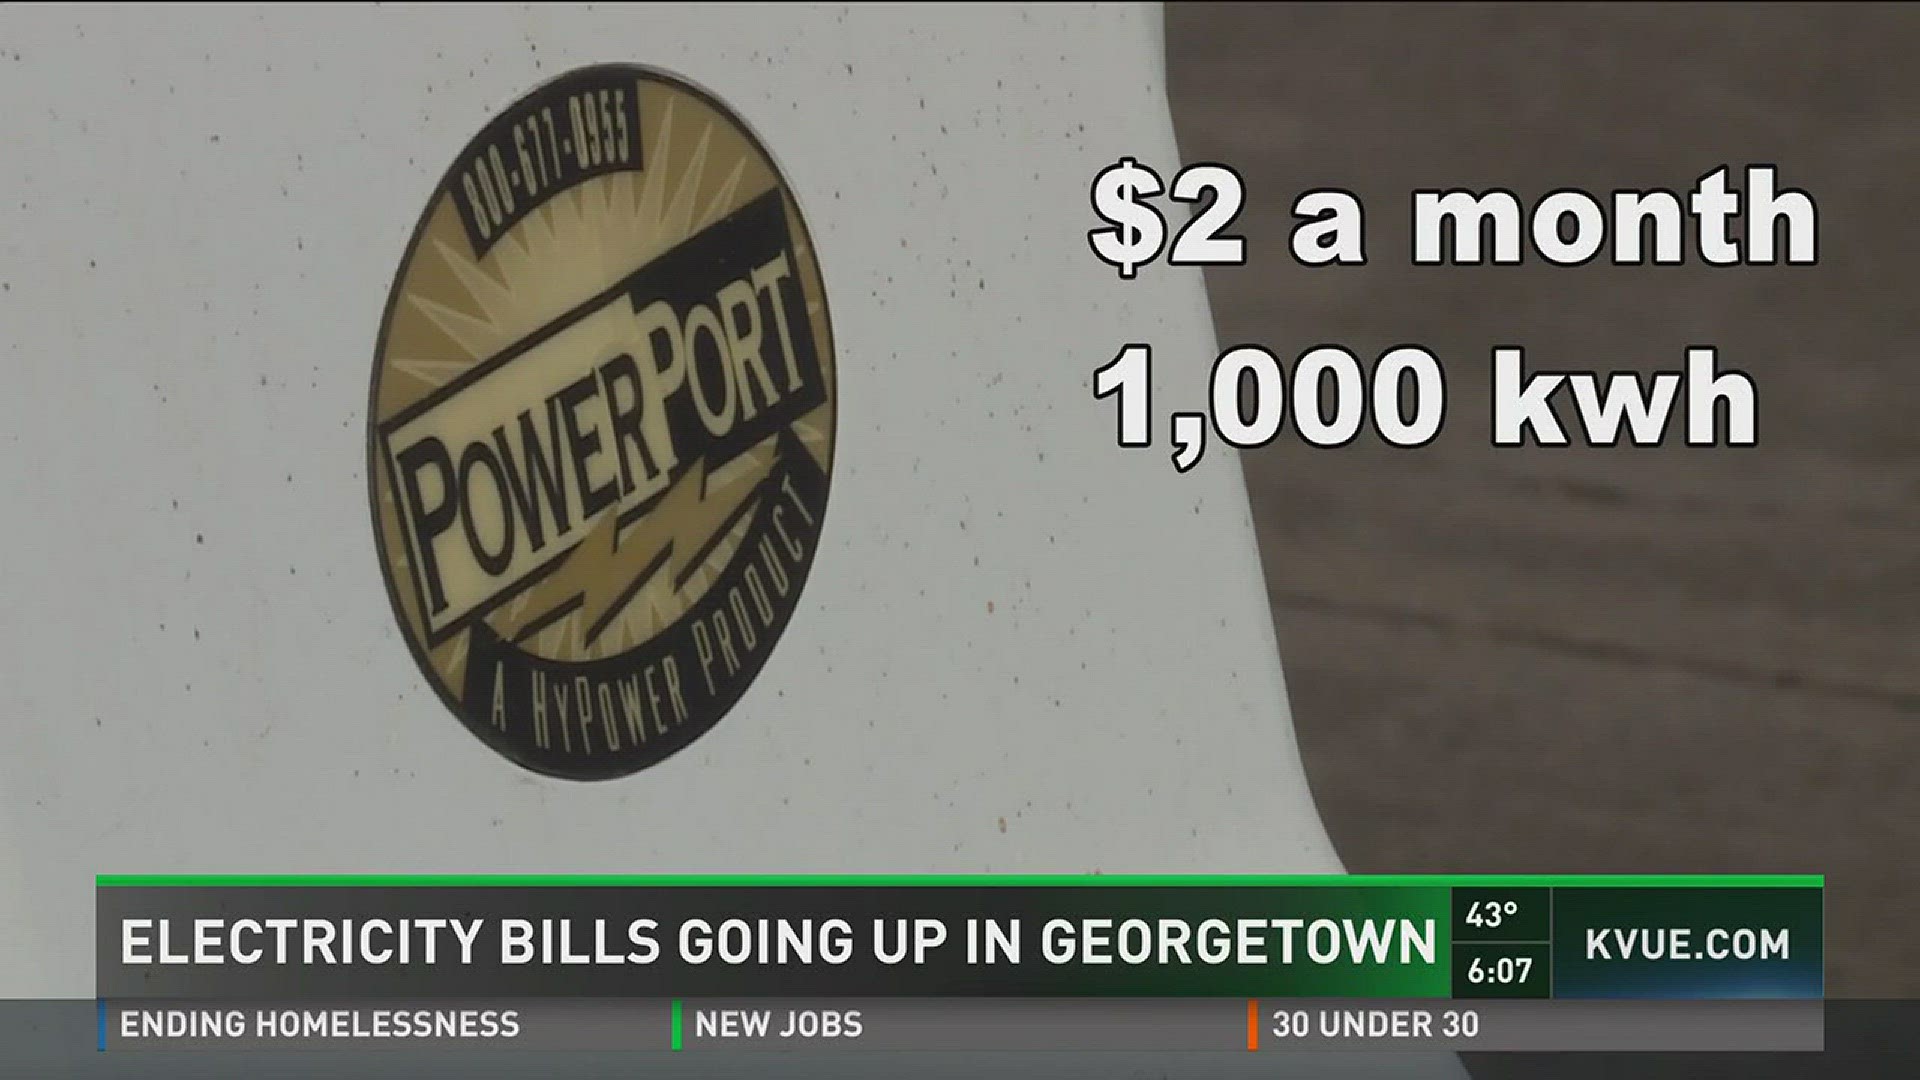 Electricity bills going up in Georgetown